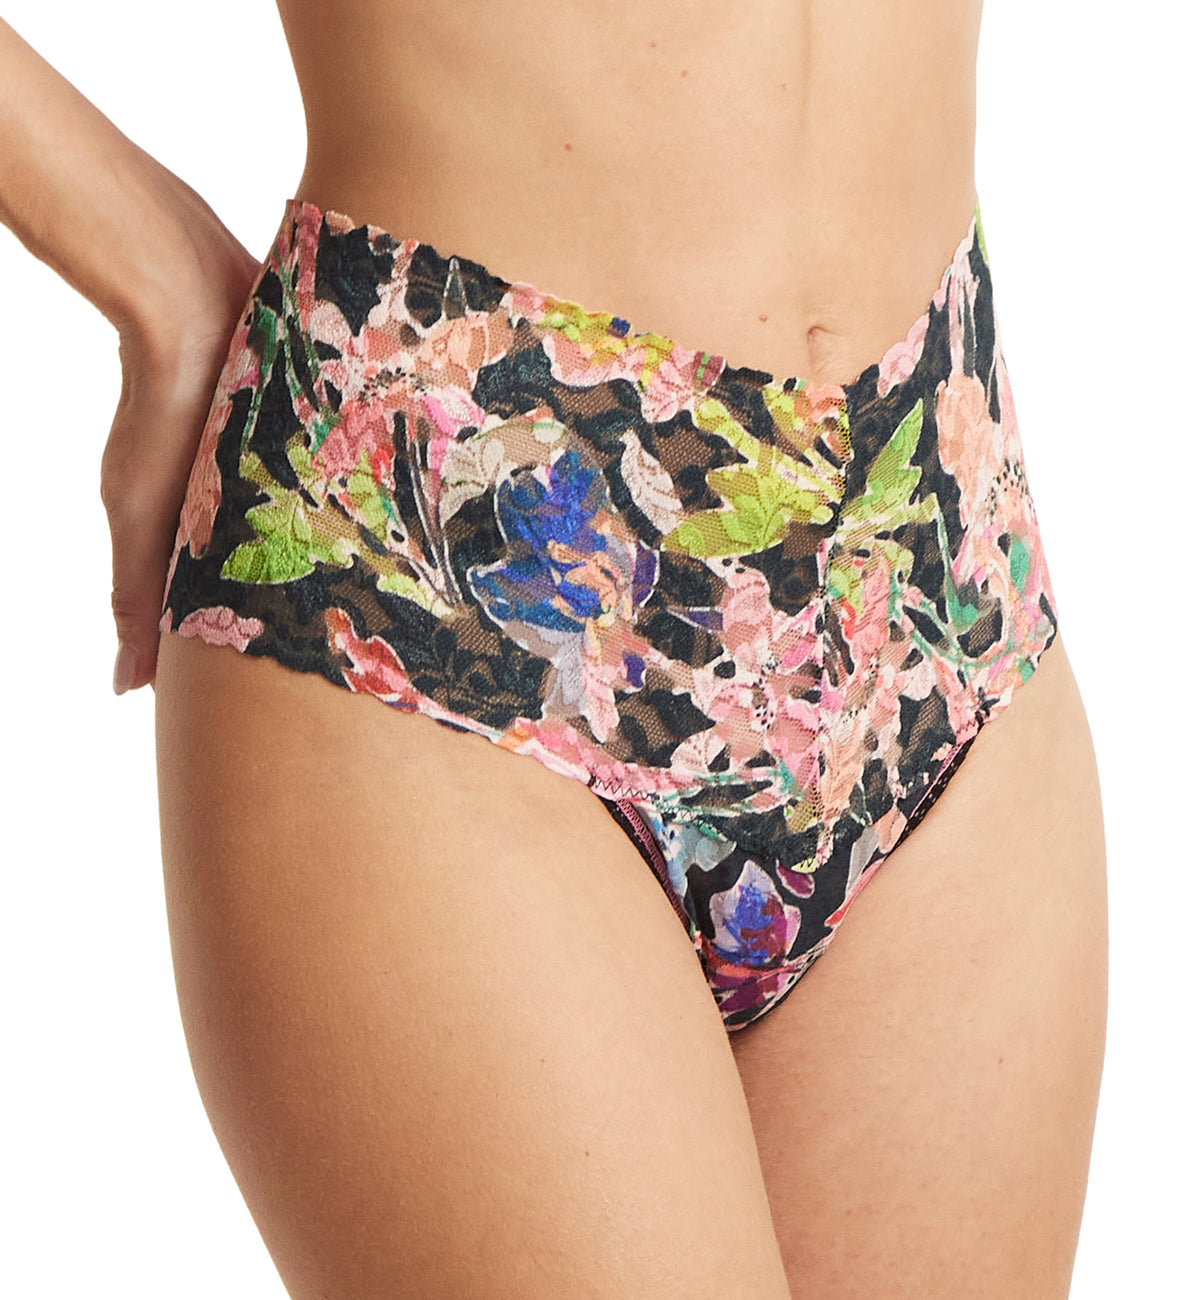 Hanky Panky Printed Retro Lace Thong (PR9K1926),Unapologetic - Unapologetic,One Size